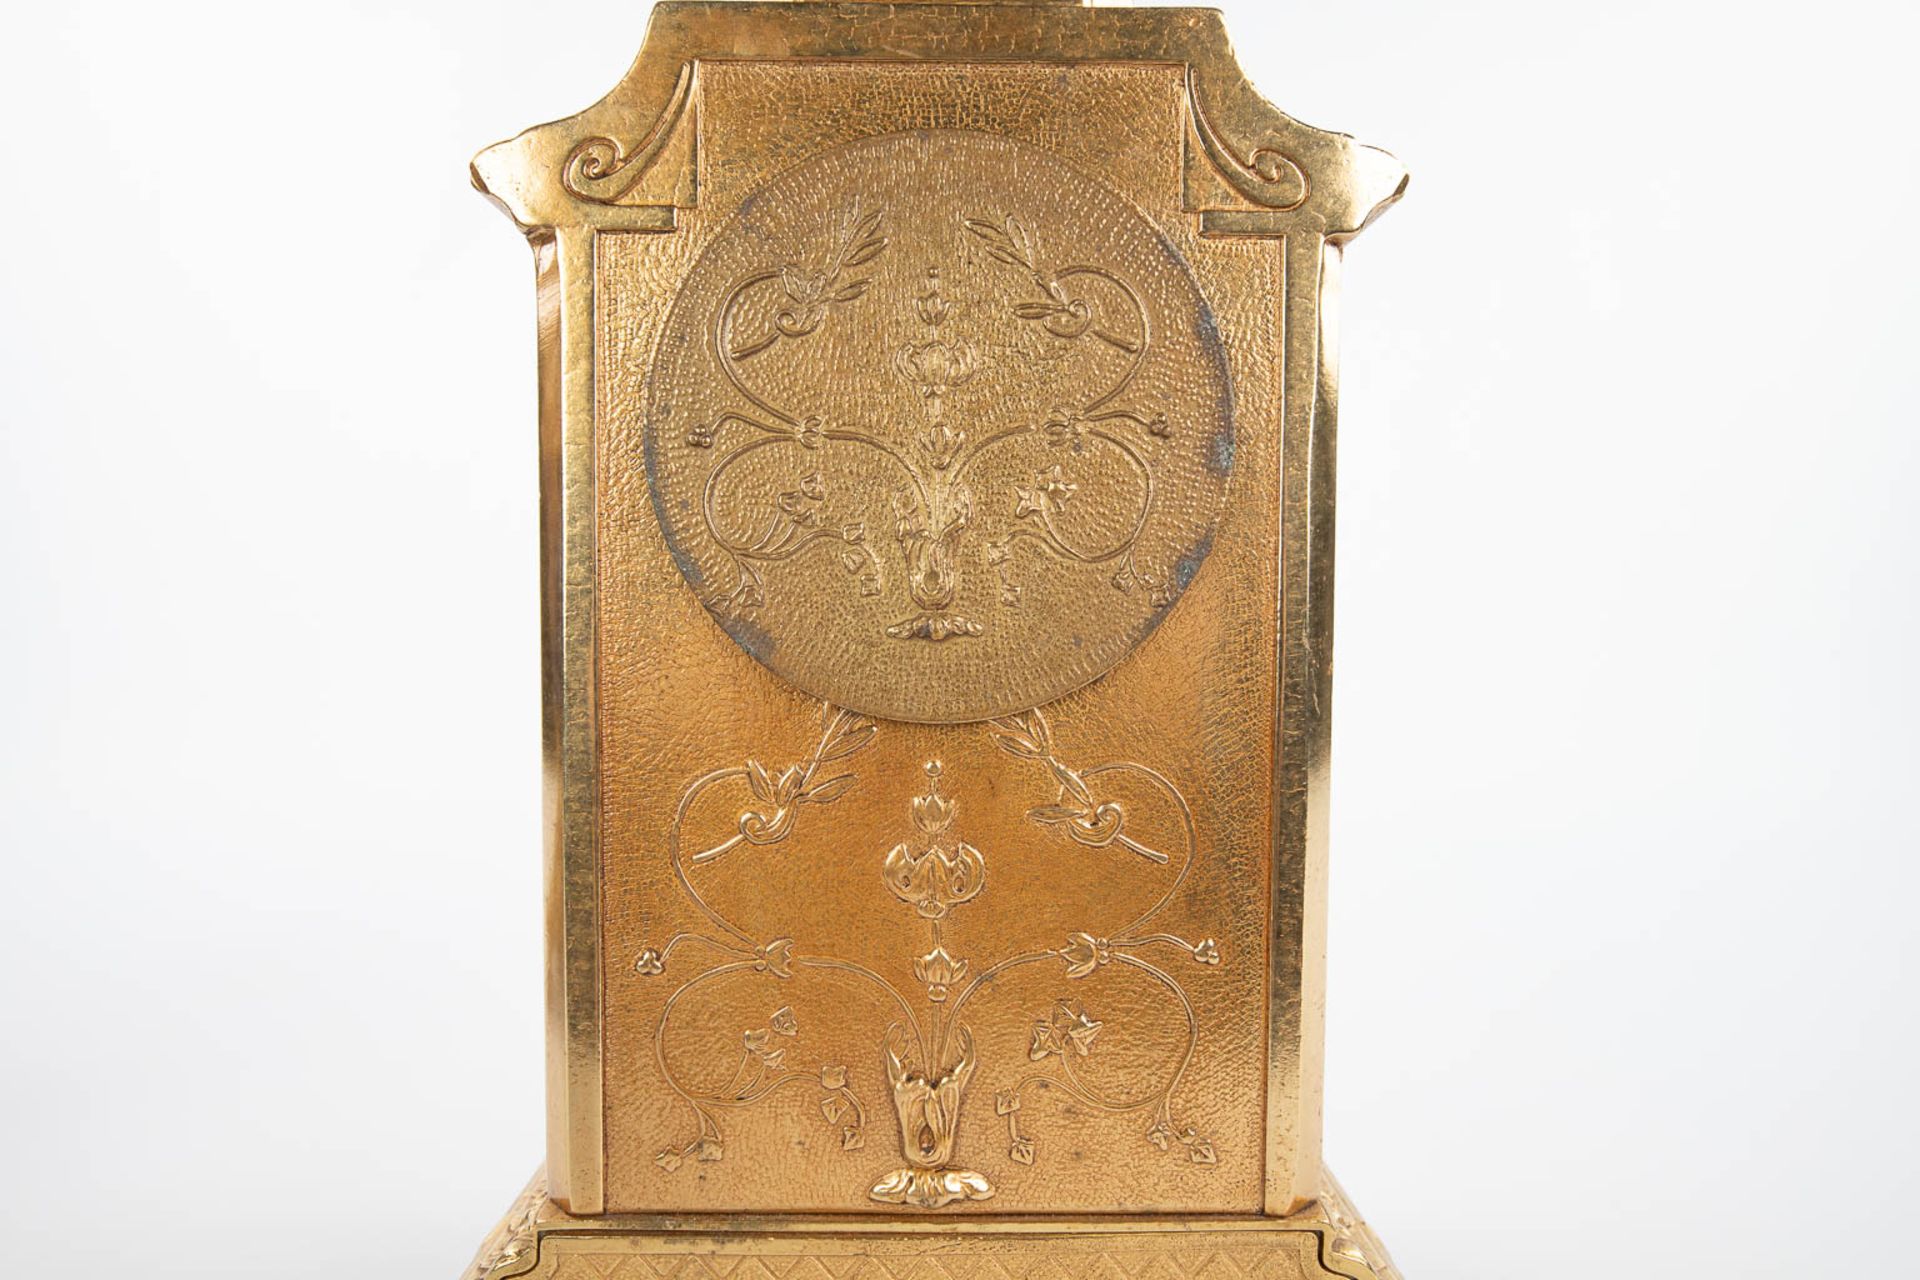 A three-piece mantle garniture clock made of bronze and porcelain and marked Imperial. (H:43cm) - Image 10 of 12